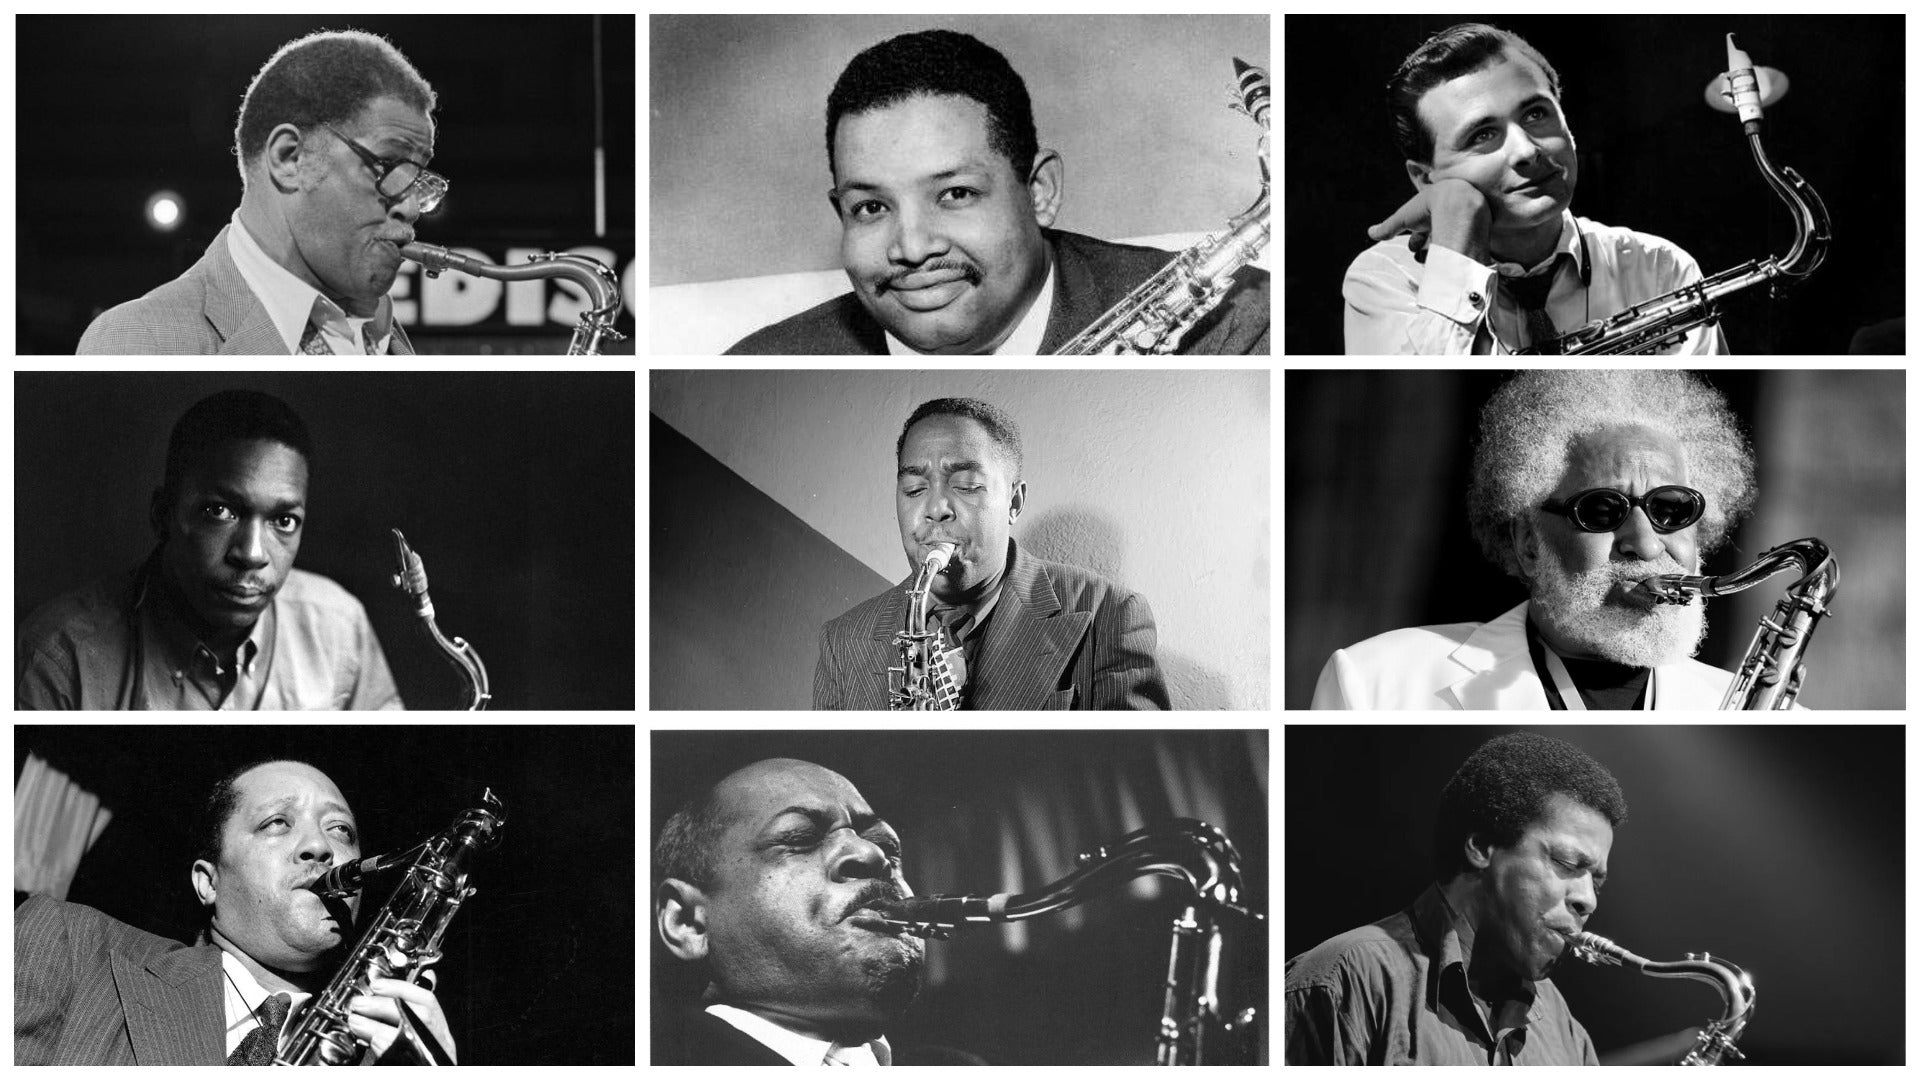 From Left to Right: Top Row - Dexter Gordon, Cannonball Adderly, Stan Getz Middle Row- John Coltrane, Charlie Parker, Sonny Rollins Bottom Row- Lester Young, Coleman Hawkins, Wayne Shorter